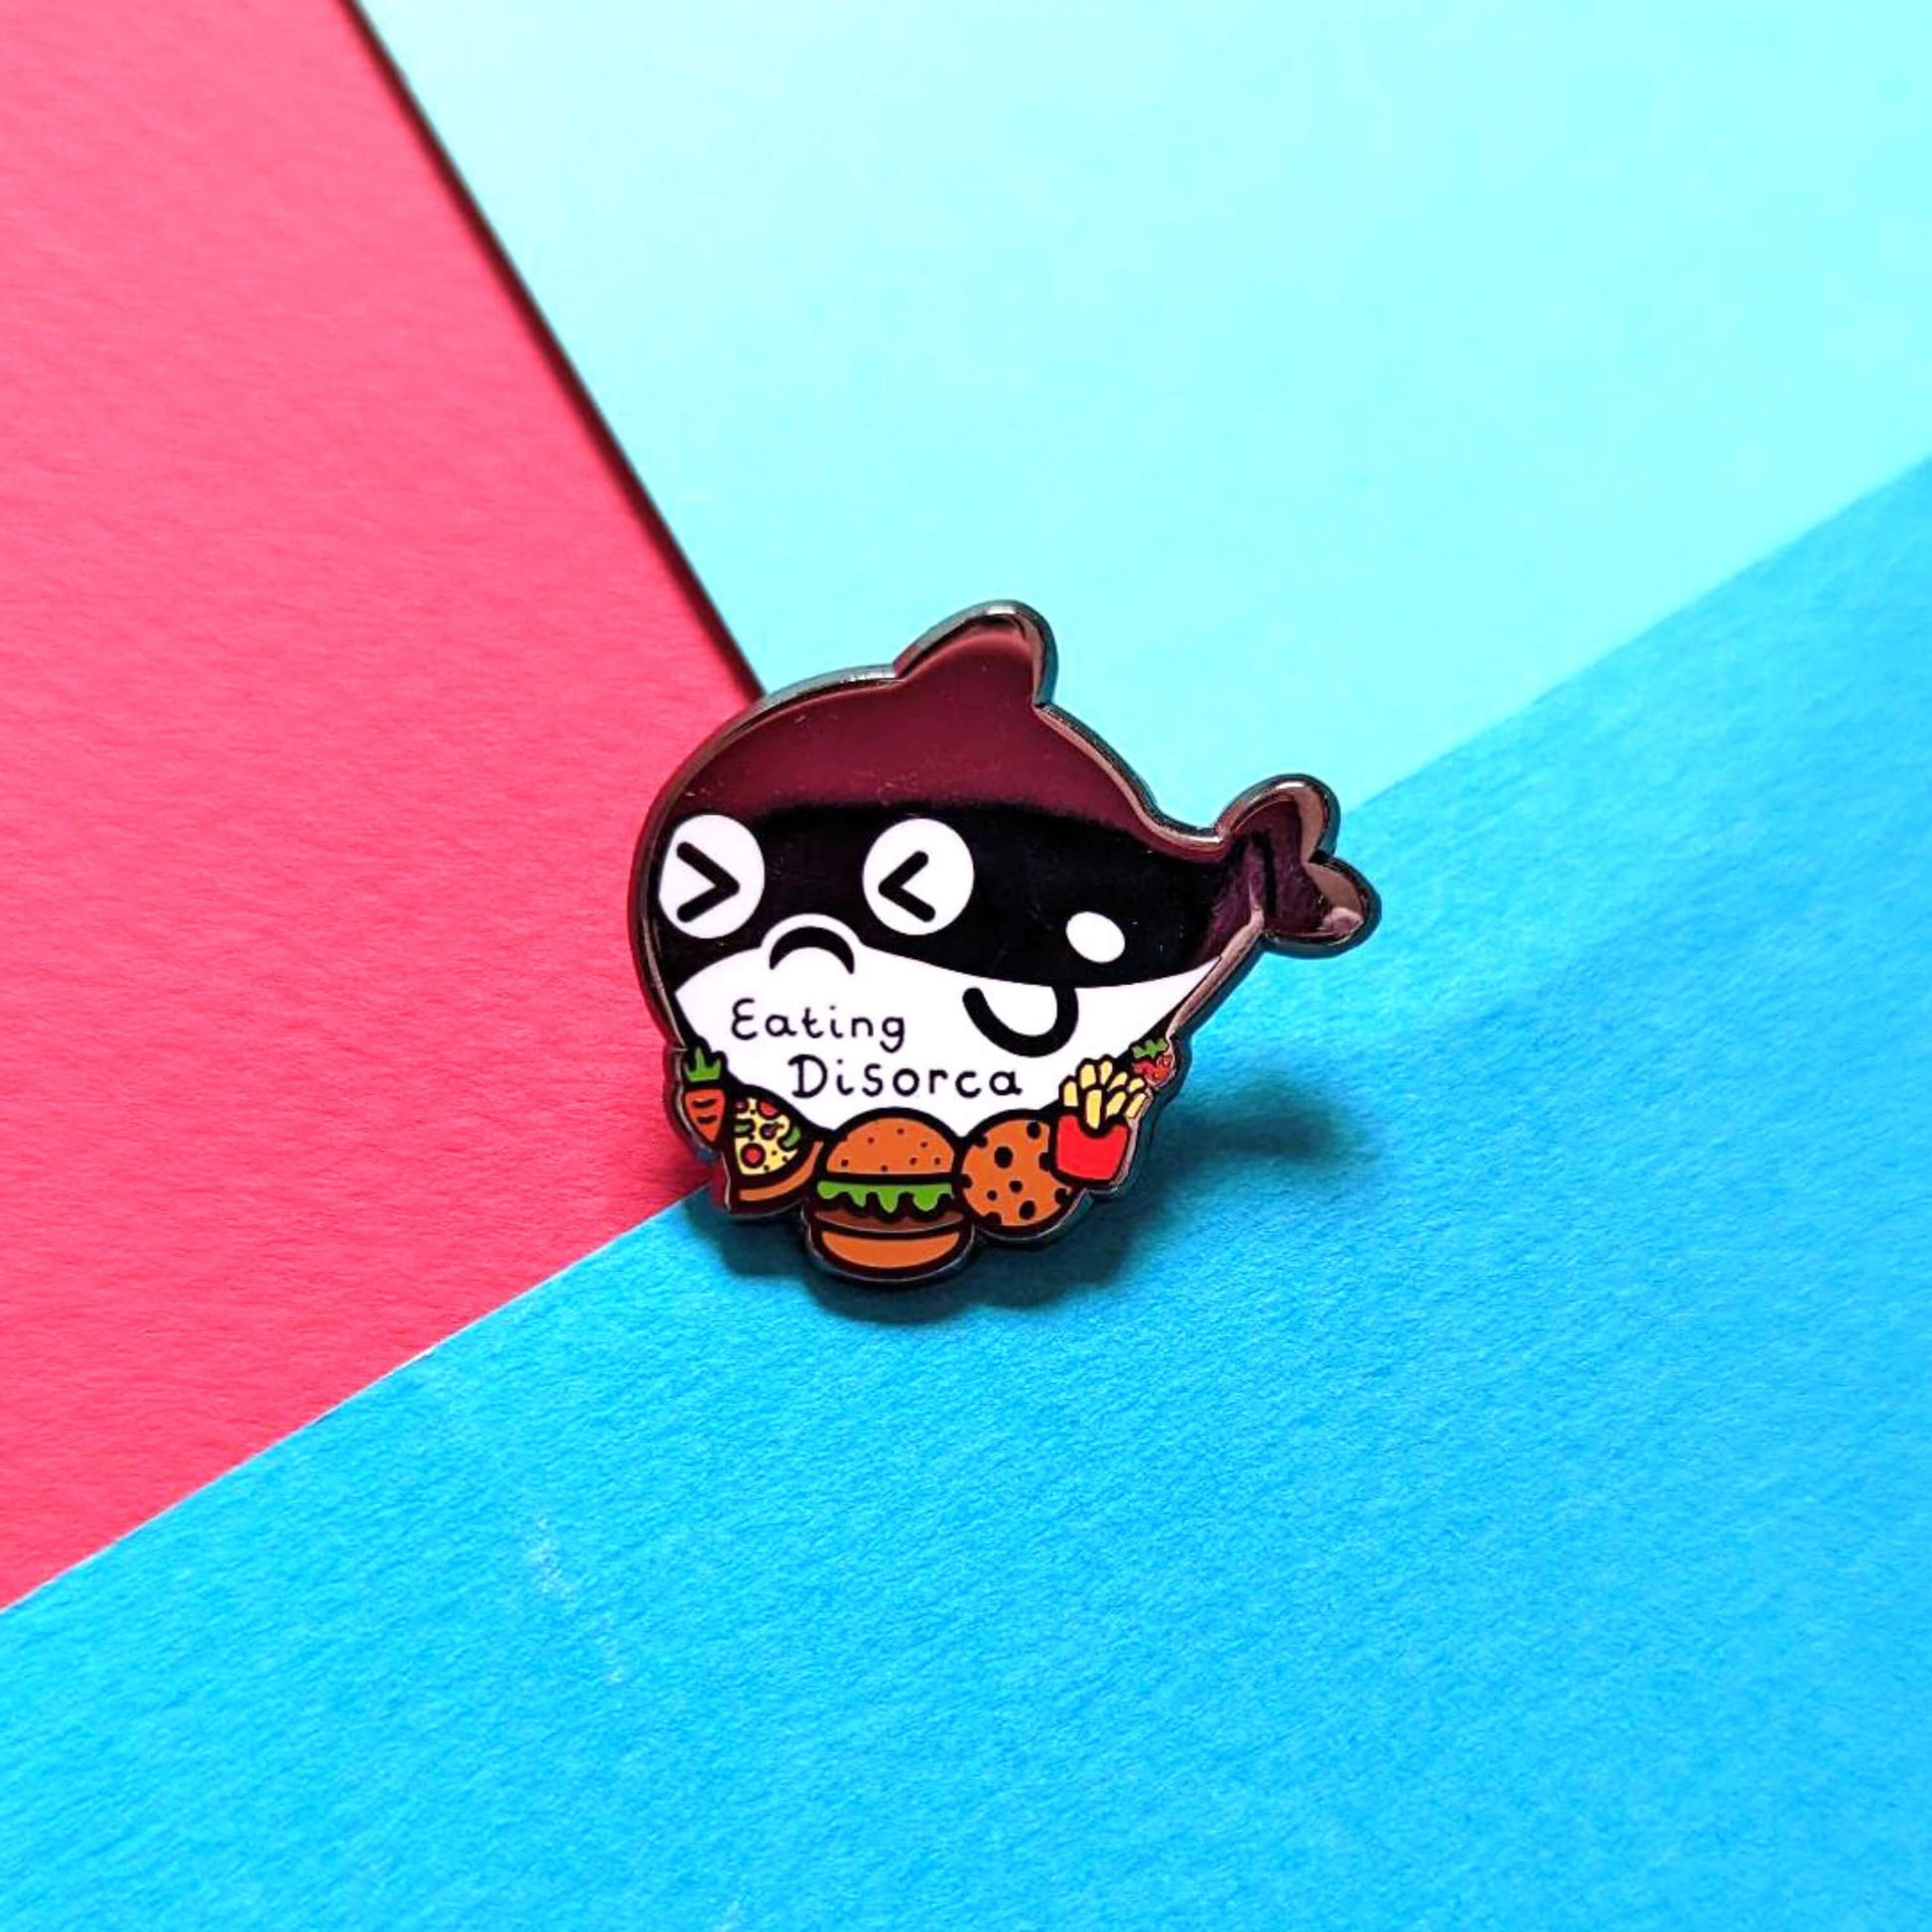 The Eating Disorca Orca Whale Enamel Pin - Eating Disorder on a red and blue background. The black orca whale shaped enamel pin has a stressed expression whilst surrounded by burgers, pizzas, cookies, fries and fruit with 'eating disorca' across its middle. The design is raising awareness for eating disorders.